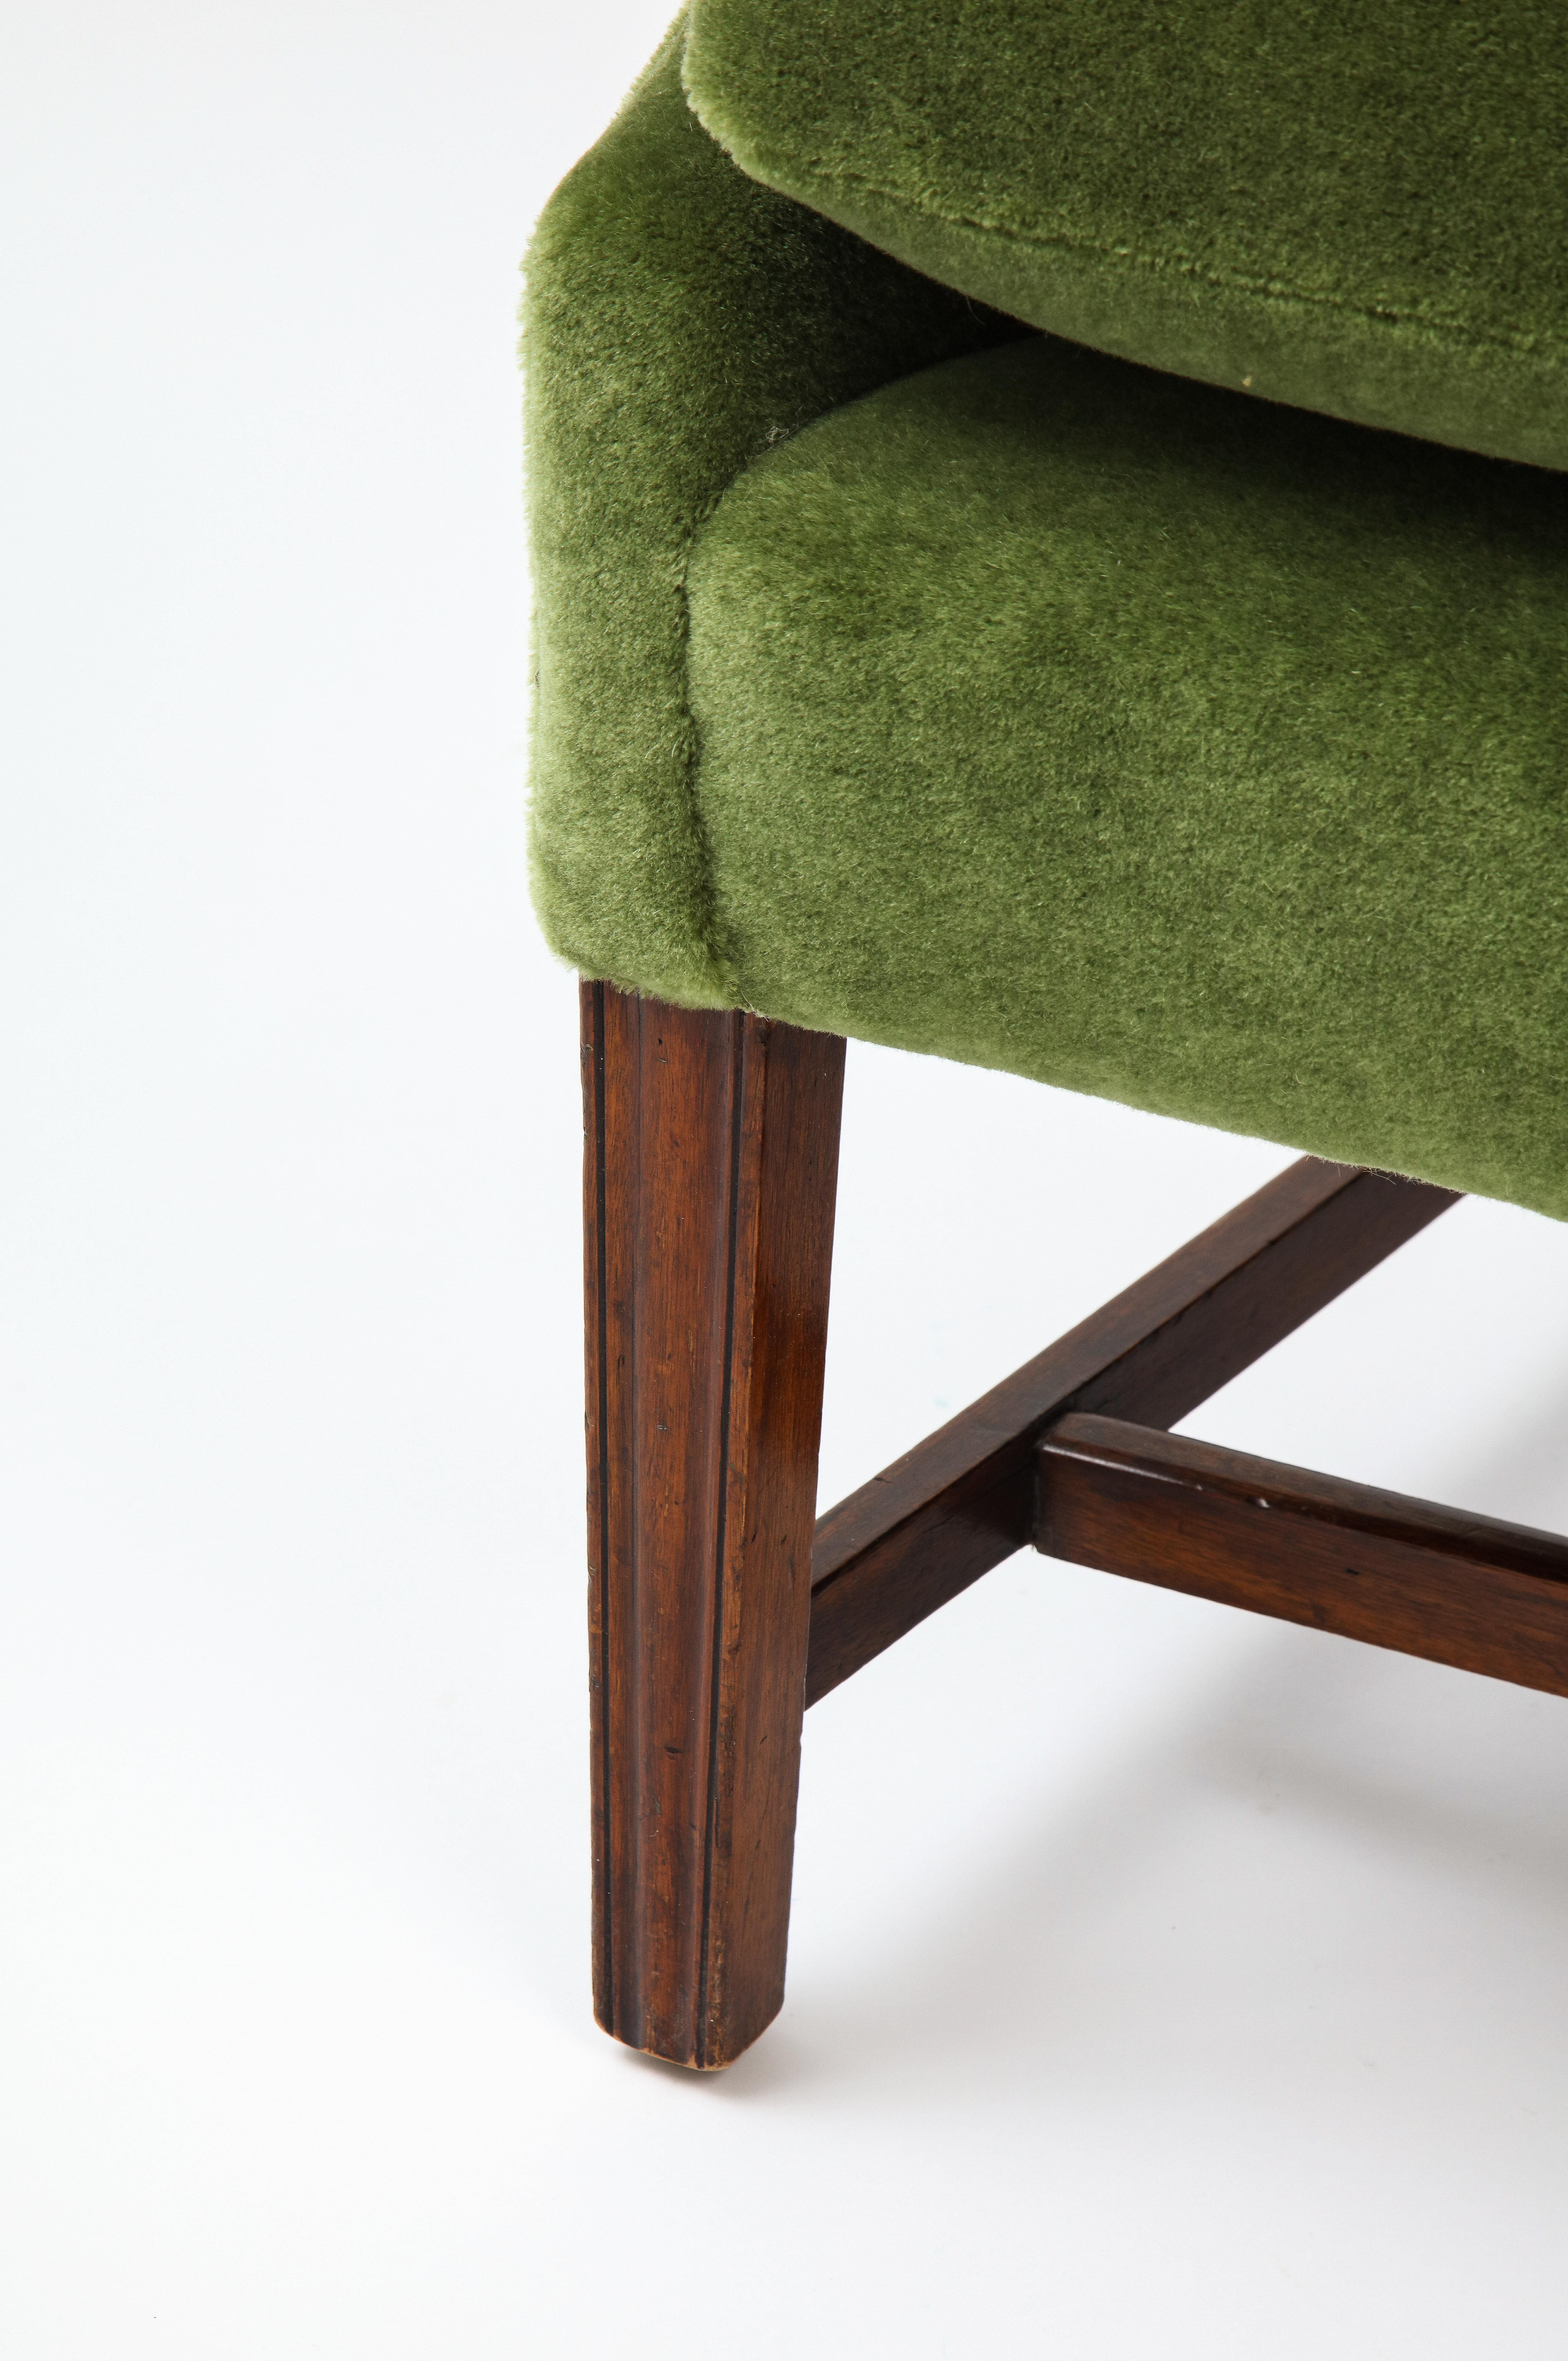 Sheraton Wingback Library Chair in Green Pierre Frey Mohair, England late 19th Century